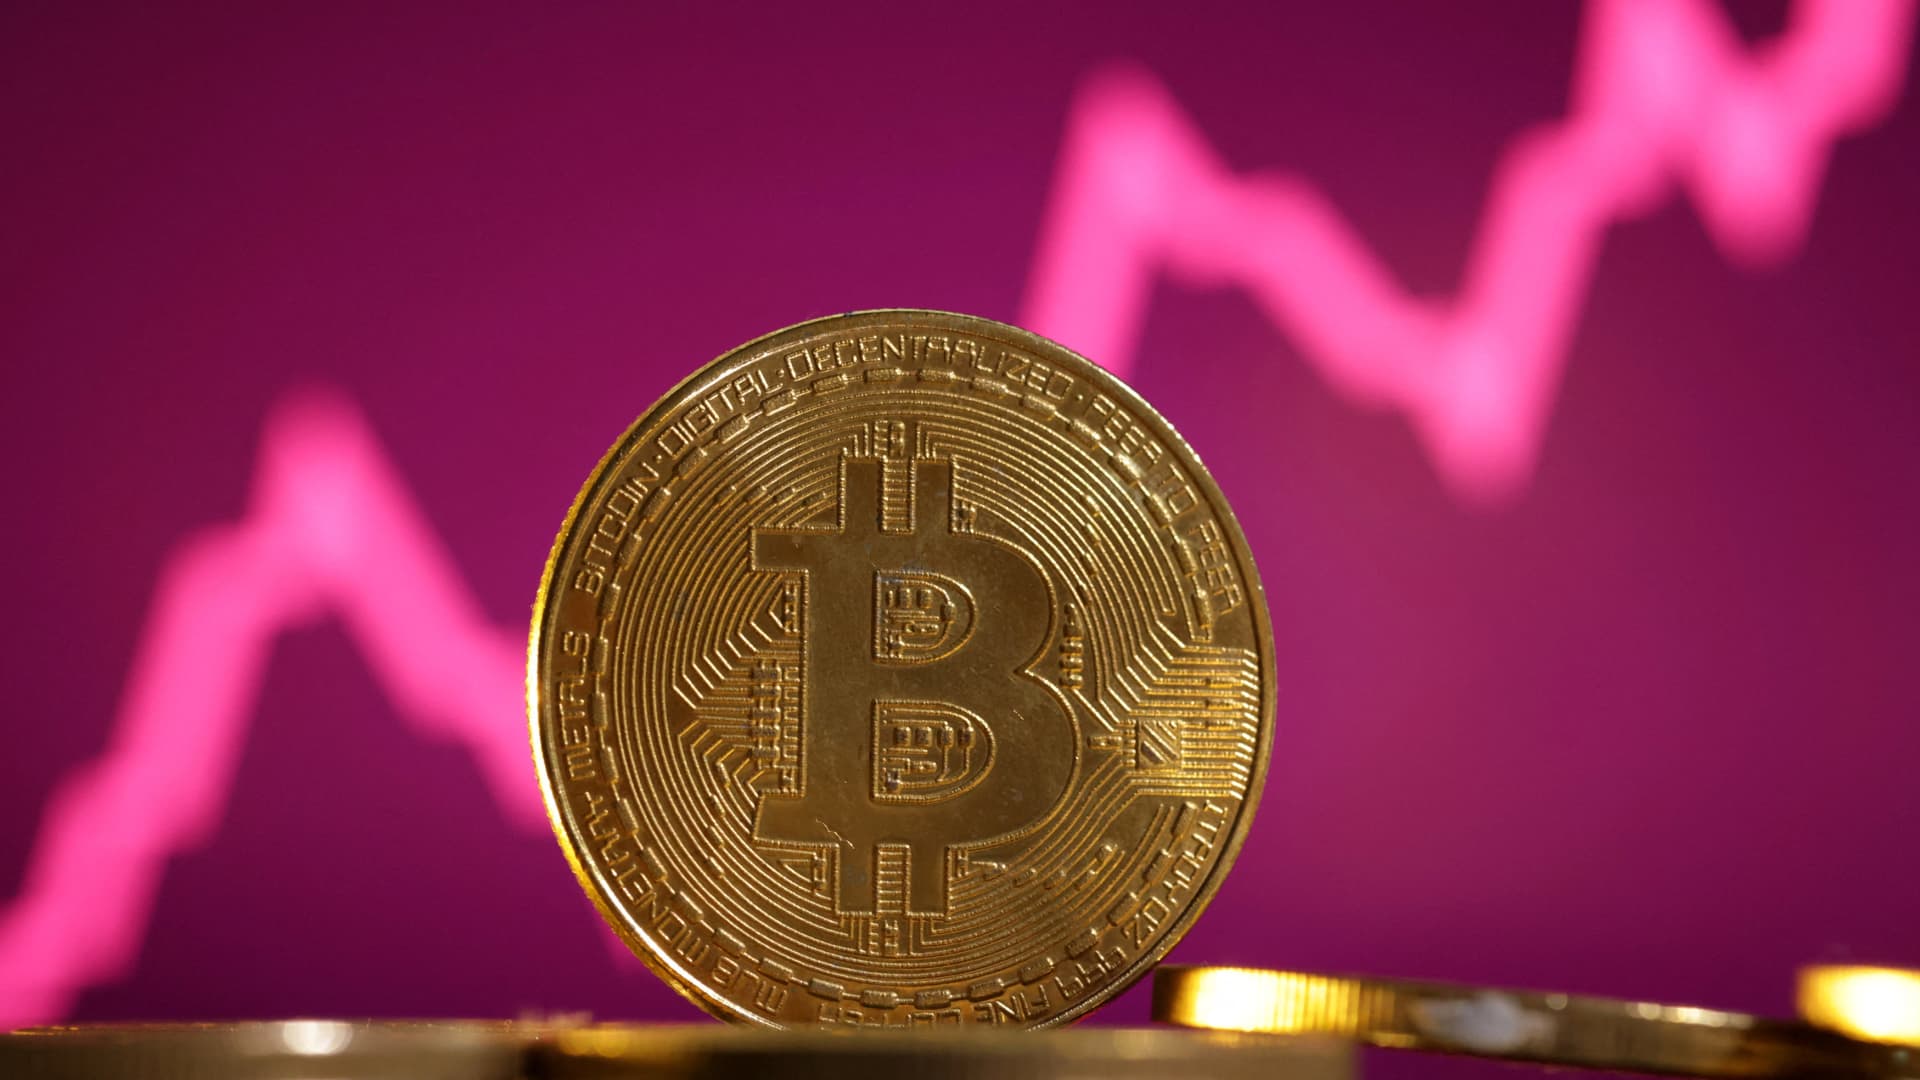 Bitcoin rallies to 2-year high of $49,000 then fizzles as crypto ETFs debut